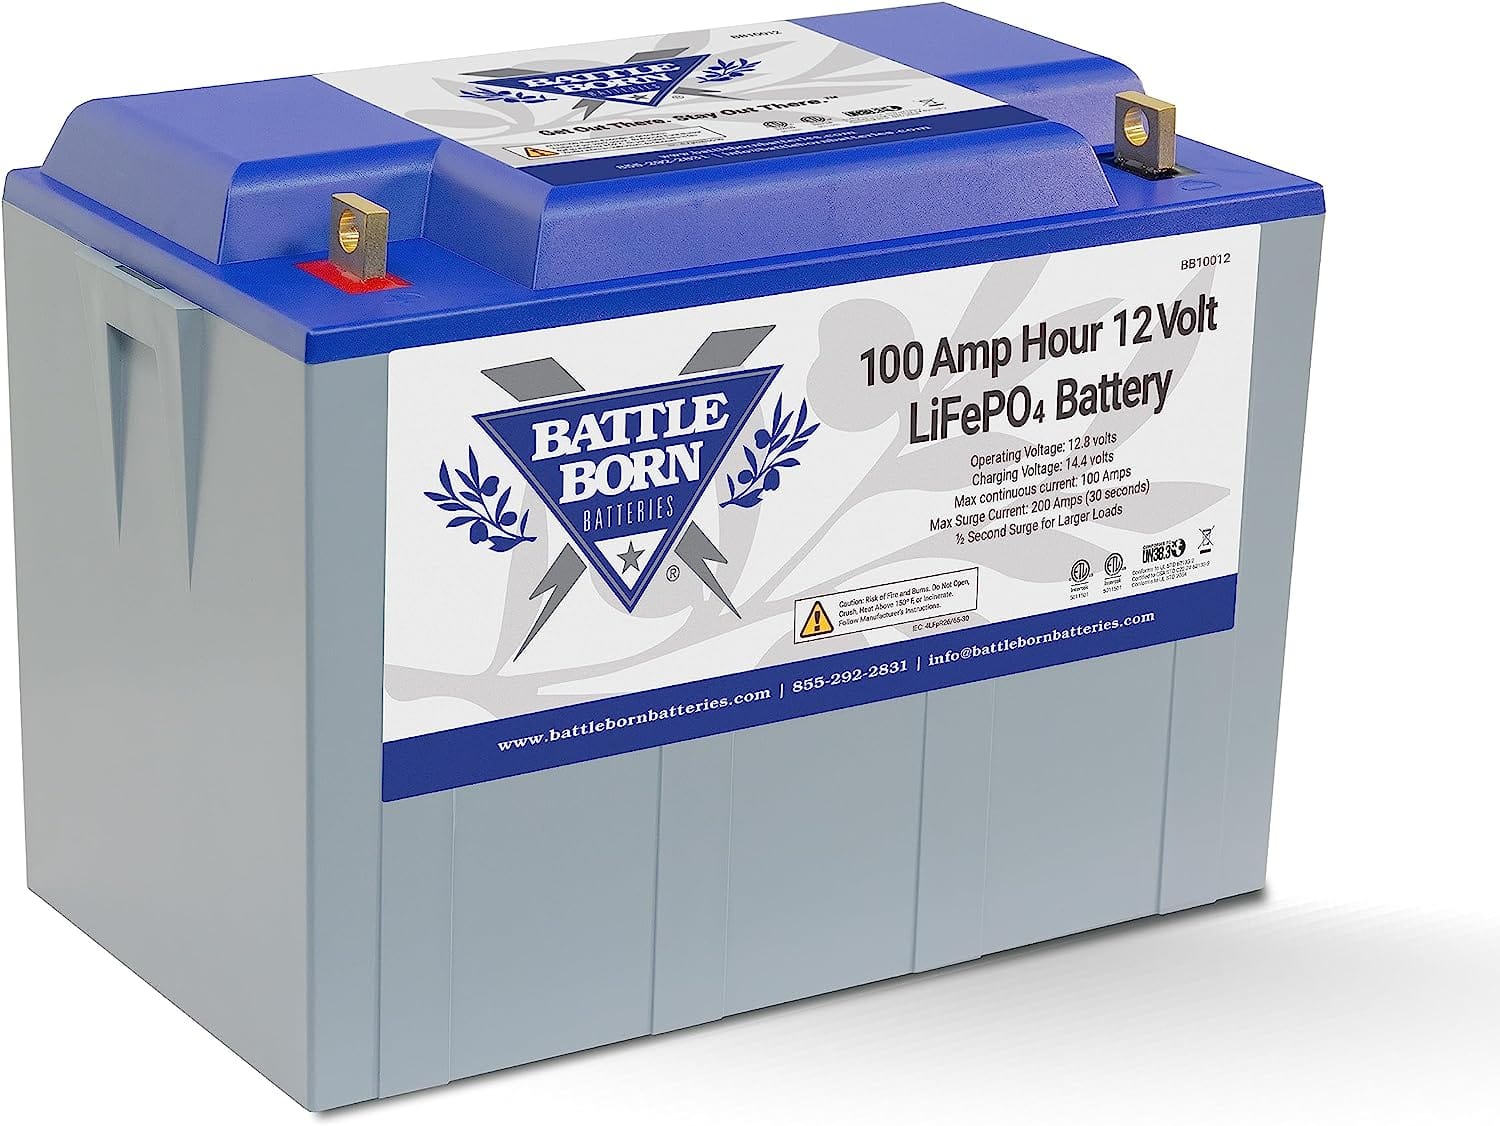 How Long Will a 100 Amp Hour Battery Last om a 30 amp load